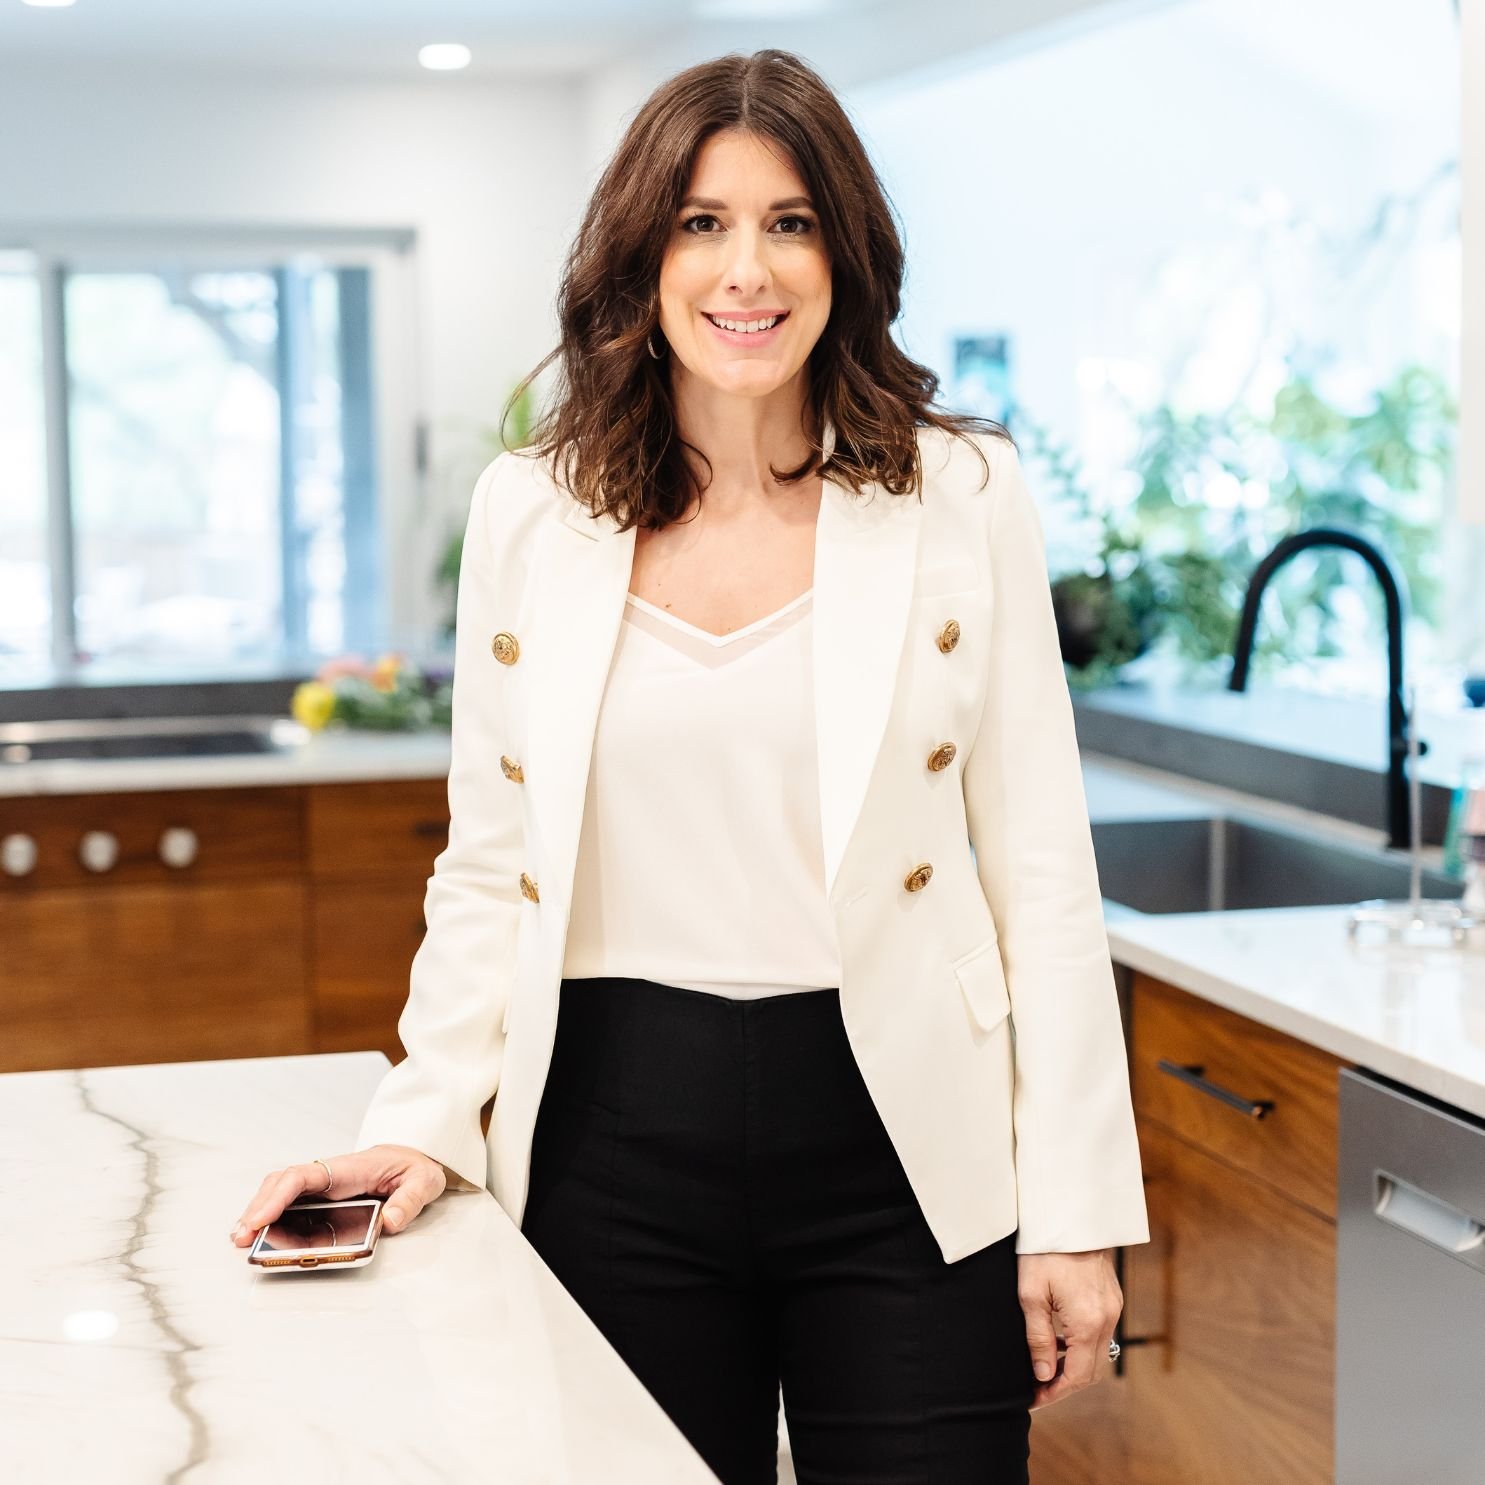 We have quite a few new followers (Hi all!) so I wanted to take a quick minute and introduce myself. I'm Kate Asay (pronounced A-SEE) and I'm the founder and owner of Asay Group Real Estate. I've been a full-time professional Realtor here in DFW sinc